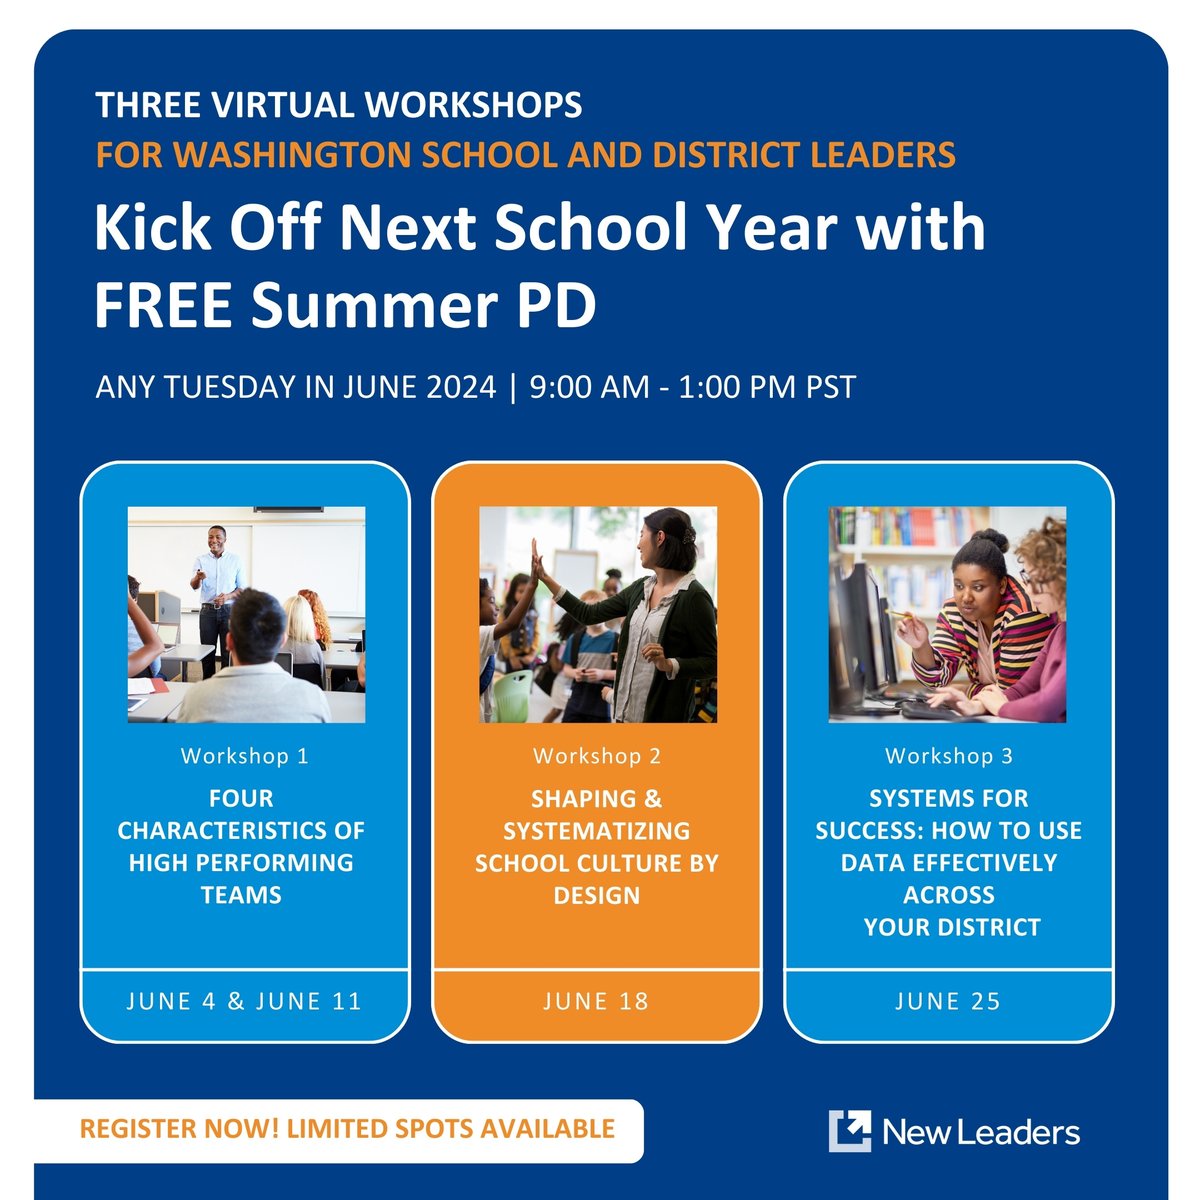 Calling all Washington School & District Leaders! Don't miss our FREE Virtual Summer Workshops. Learn how to build high-performing teams, shape positive school cultures, and make data-driven decisions. Limited spots available — register now: hubs.ly/Q02yPN3p0 #WAEdLeaders